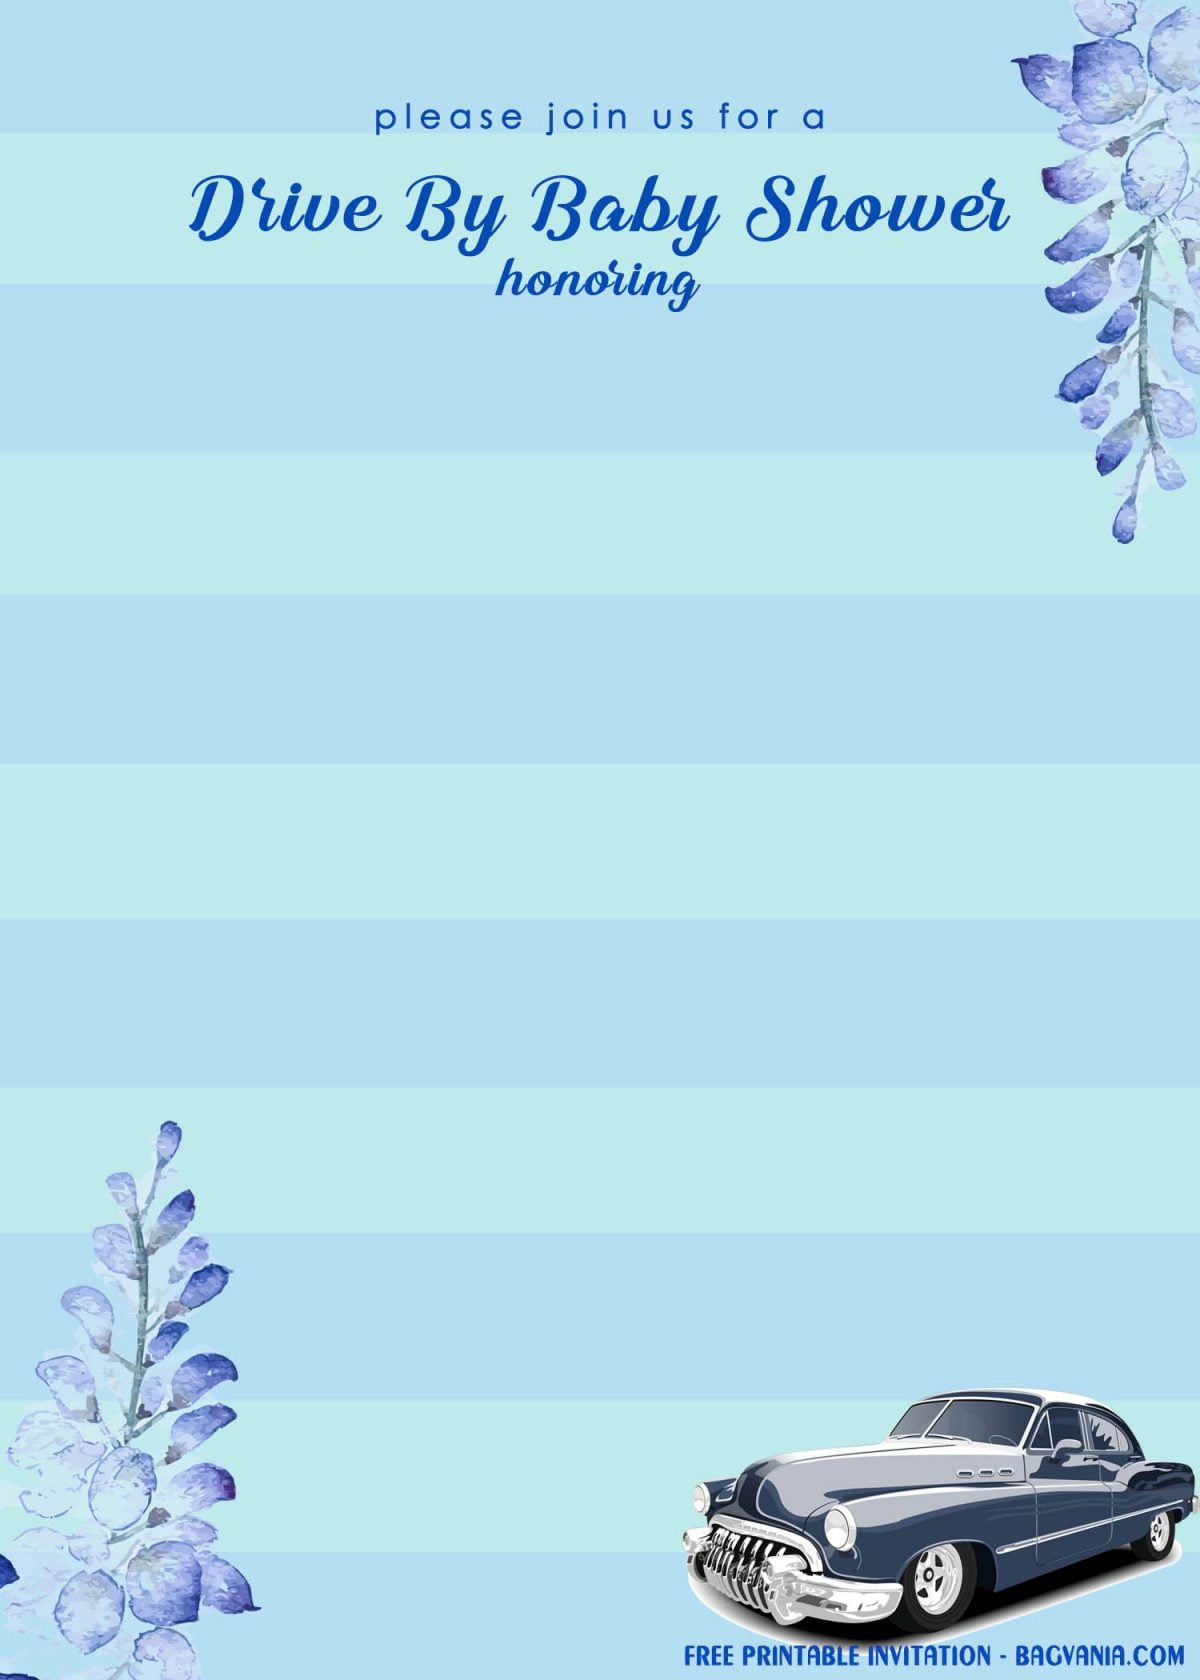 Free Printable Blue Stripes Drive By Baby Shower Invitation Templates With Blue Eucalyptus